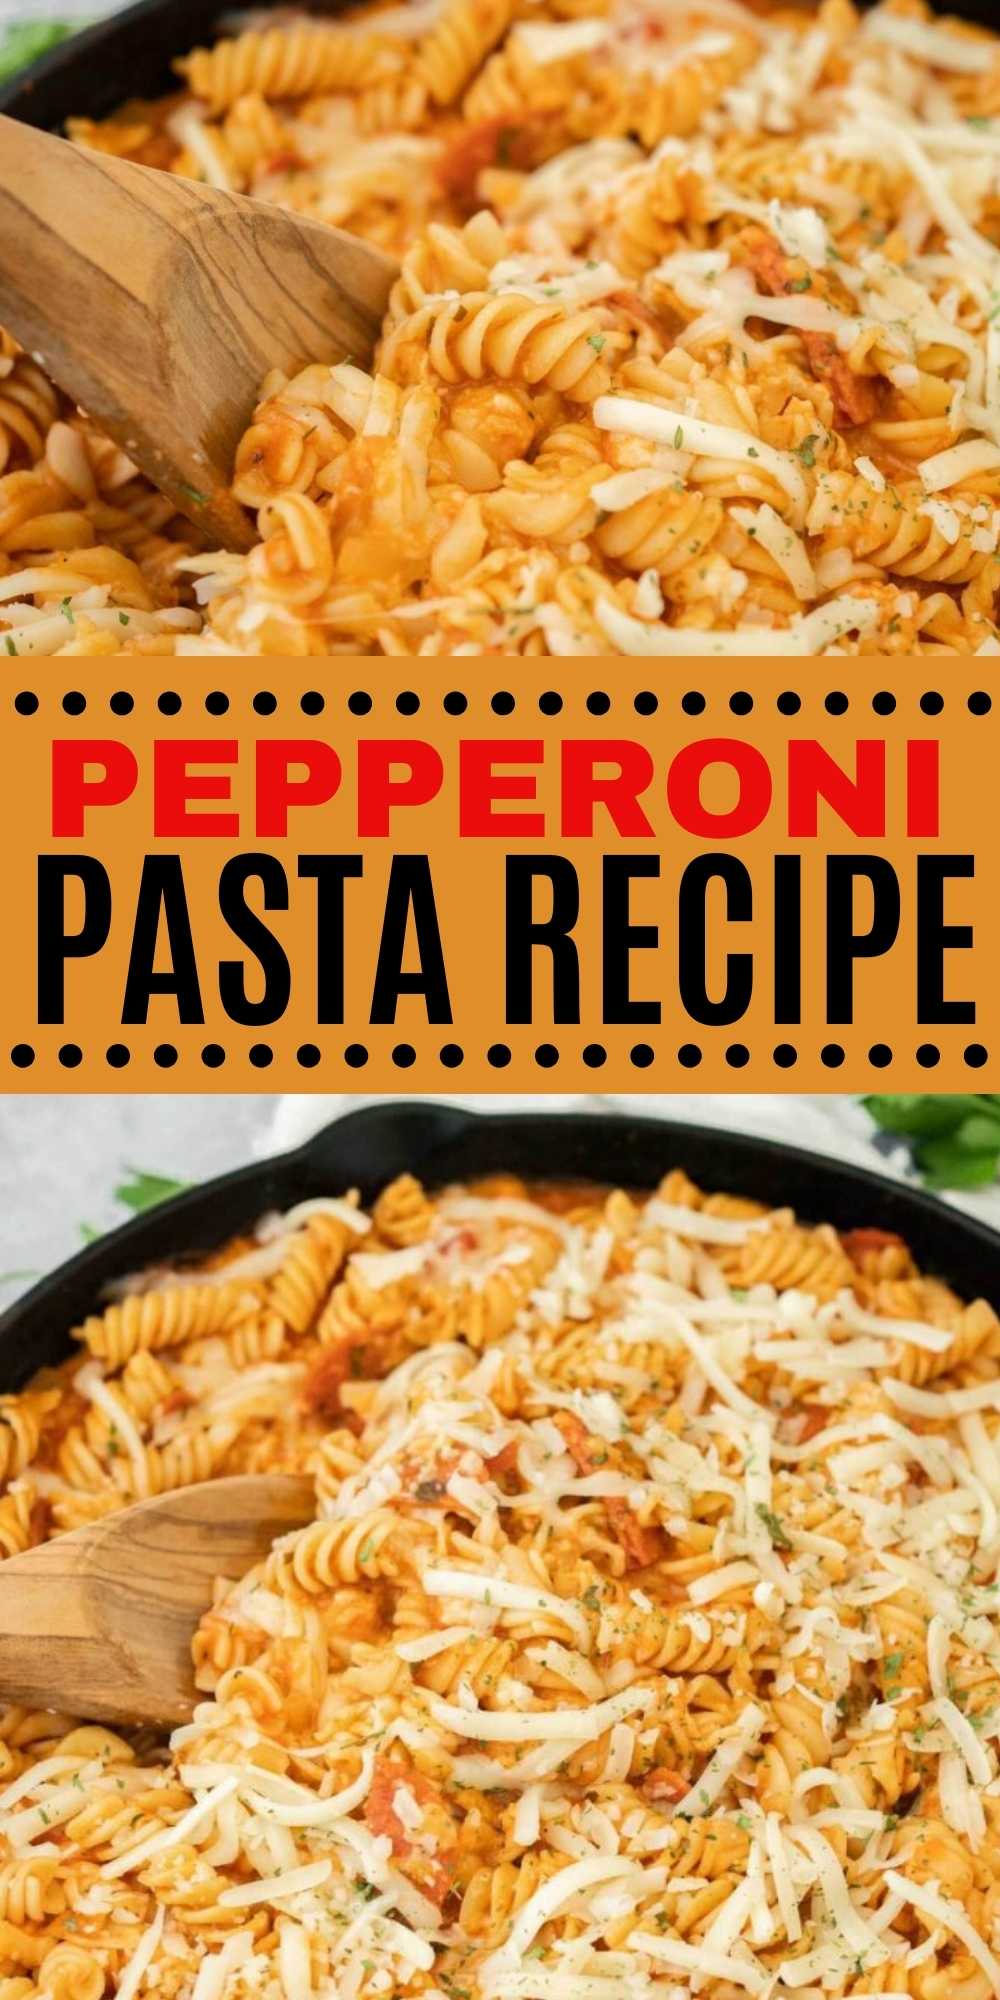 I've got another fun and frugal 20 minute dinner idea that your family will love! This Pepperoni Pasta Recipe is delicious and easy to make skillet recipe. #eatingonadime #pepperonipasta #skilletrecipe